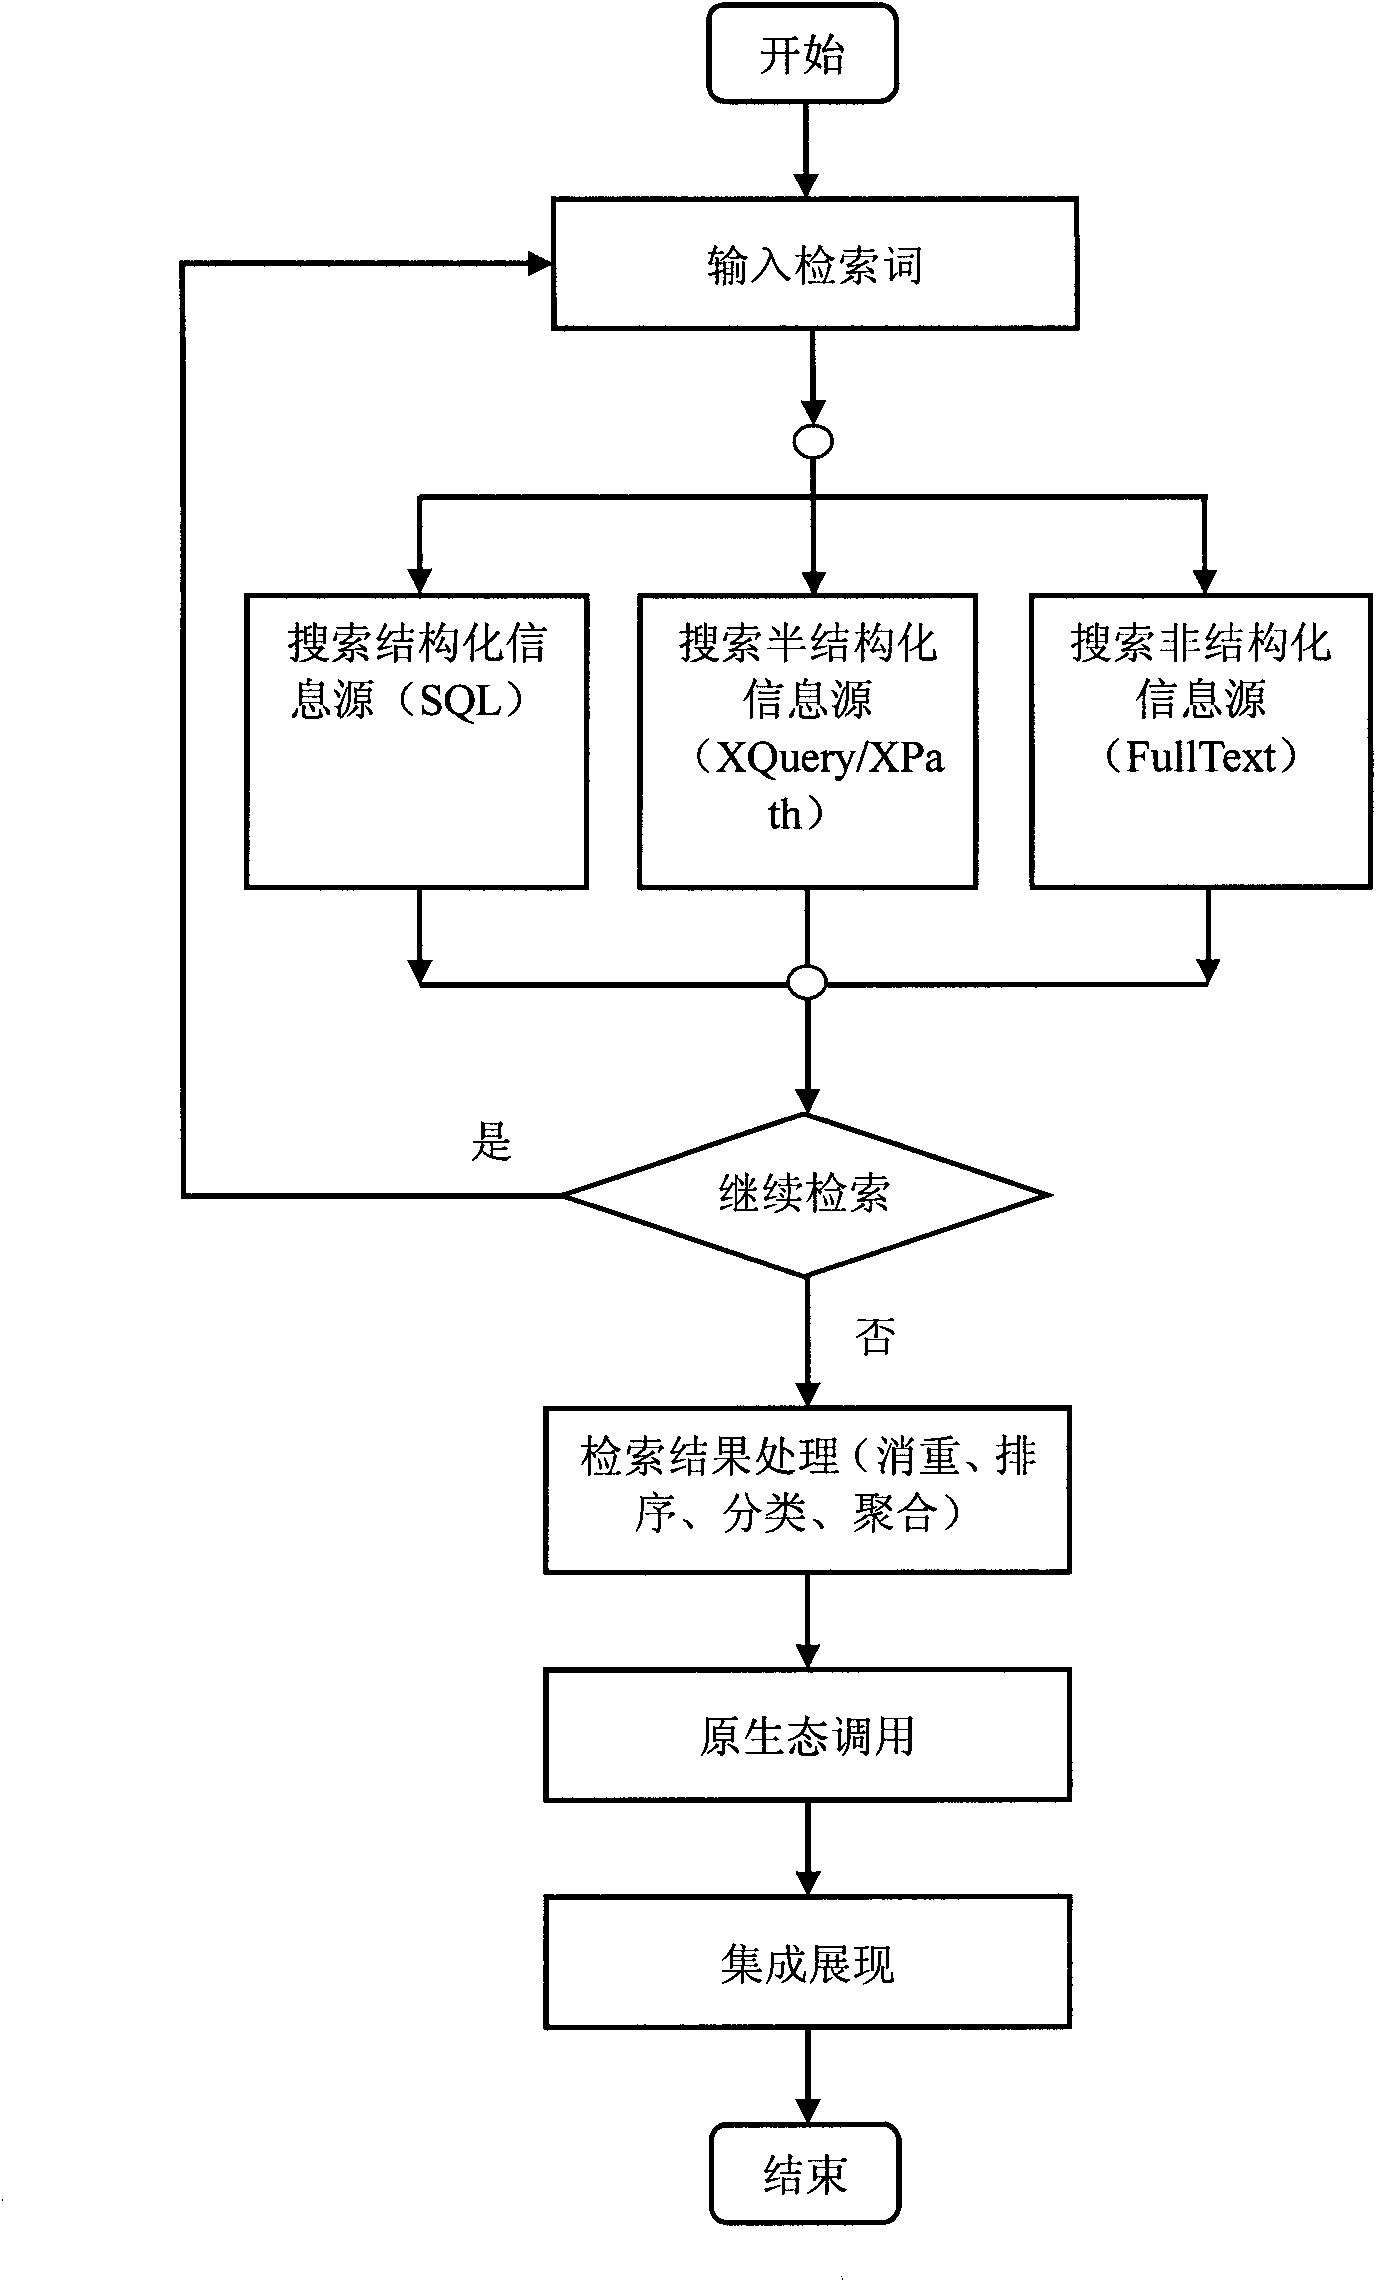 Federated search and search result integrated display method and system